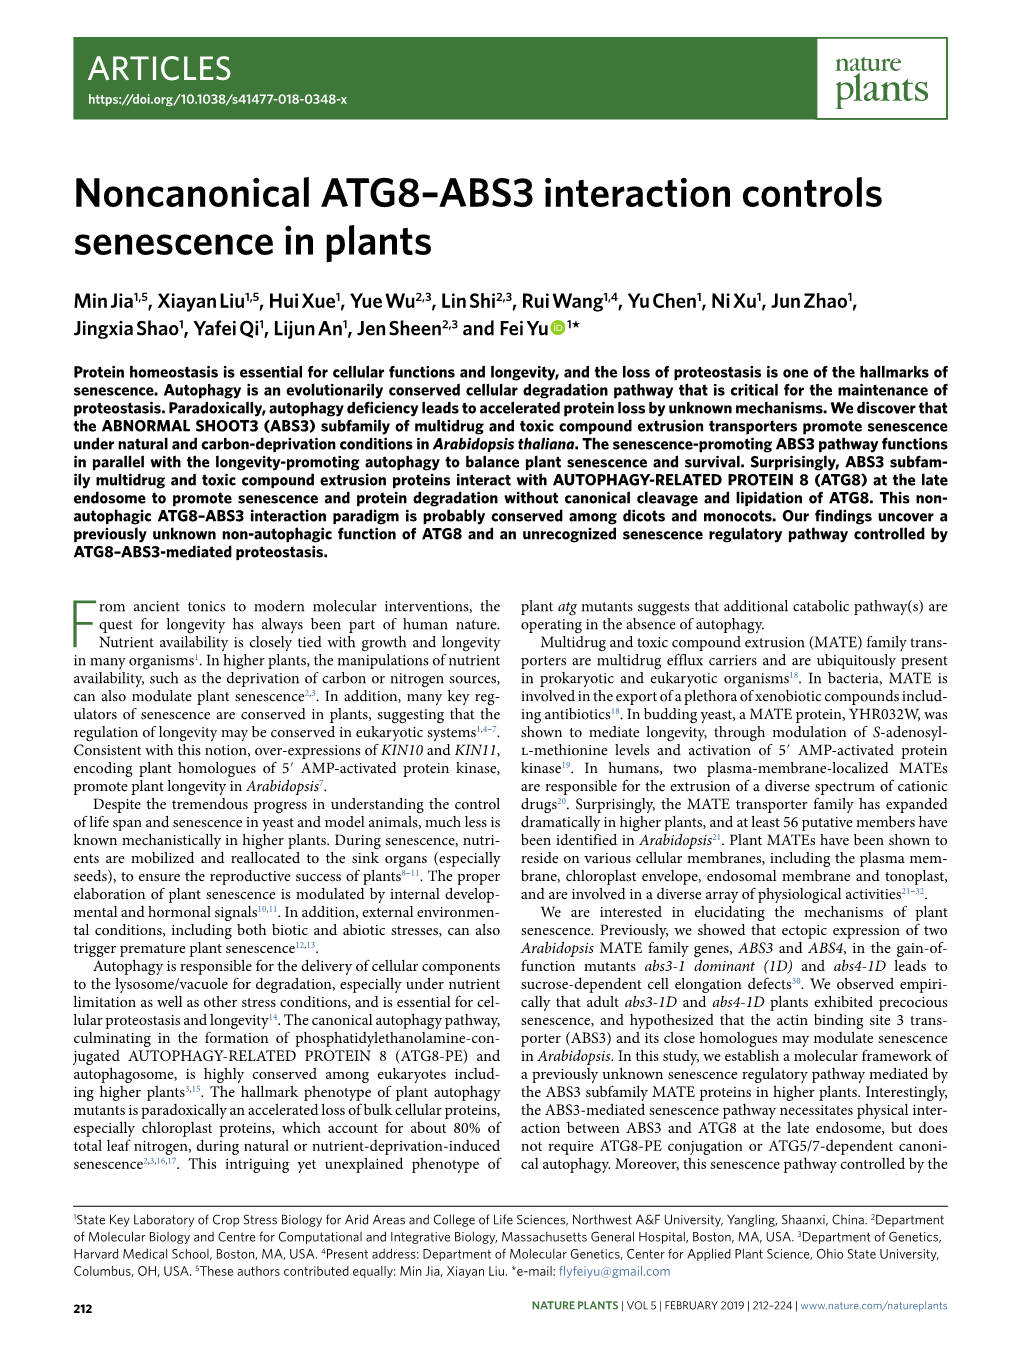 Noncanonical ATG8–ABS3 Interaction Controls Senescence in Plants